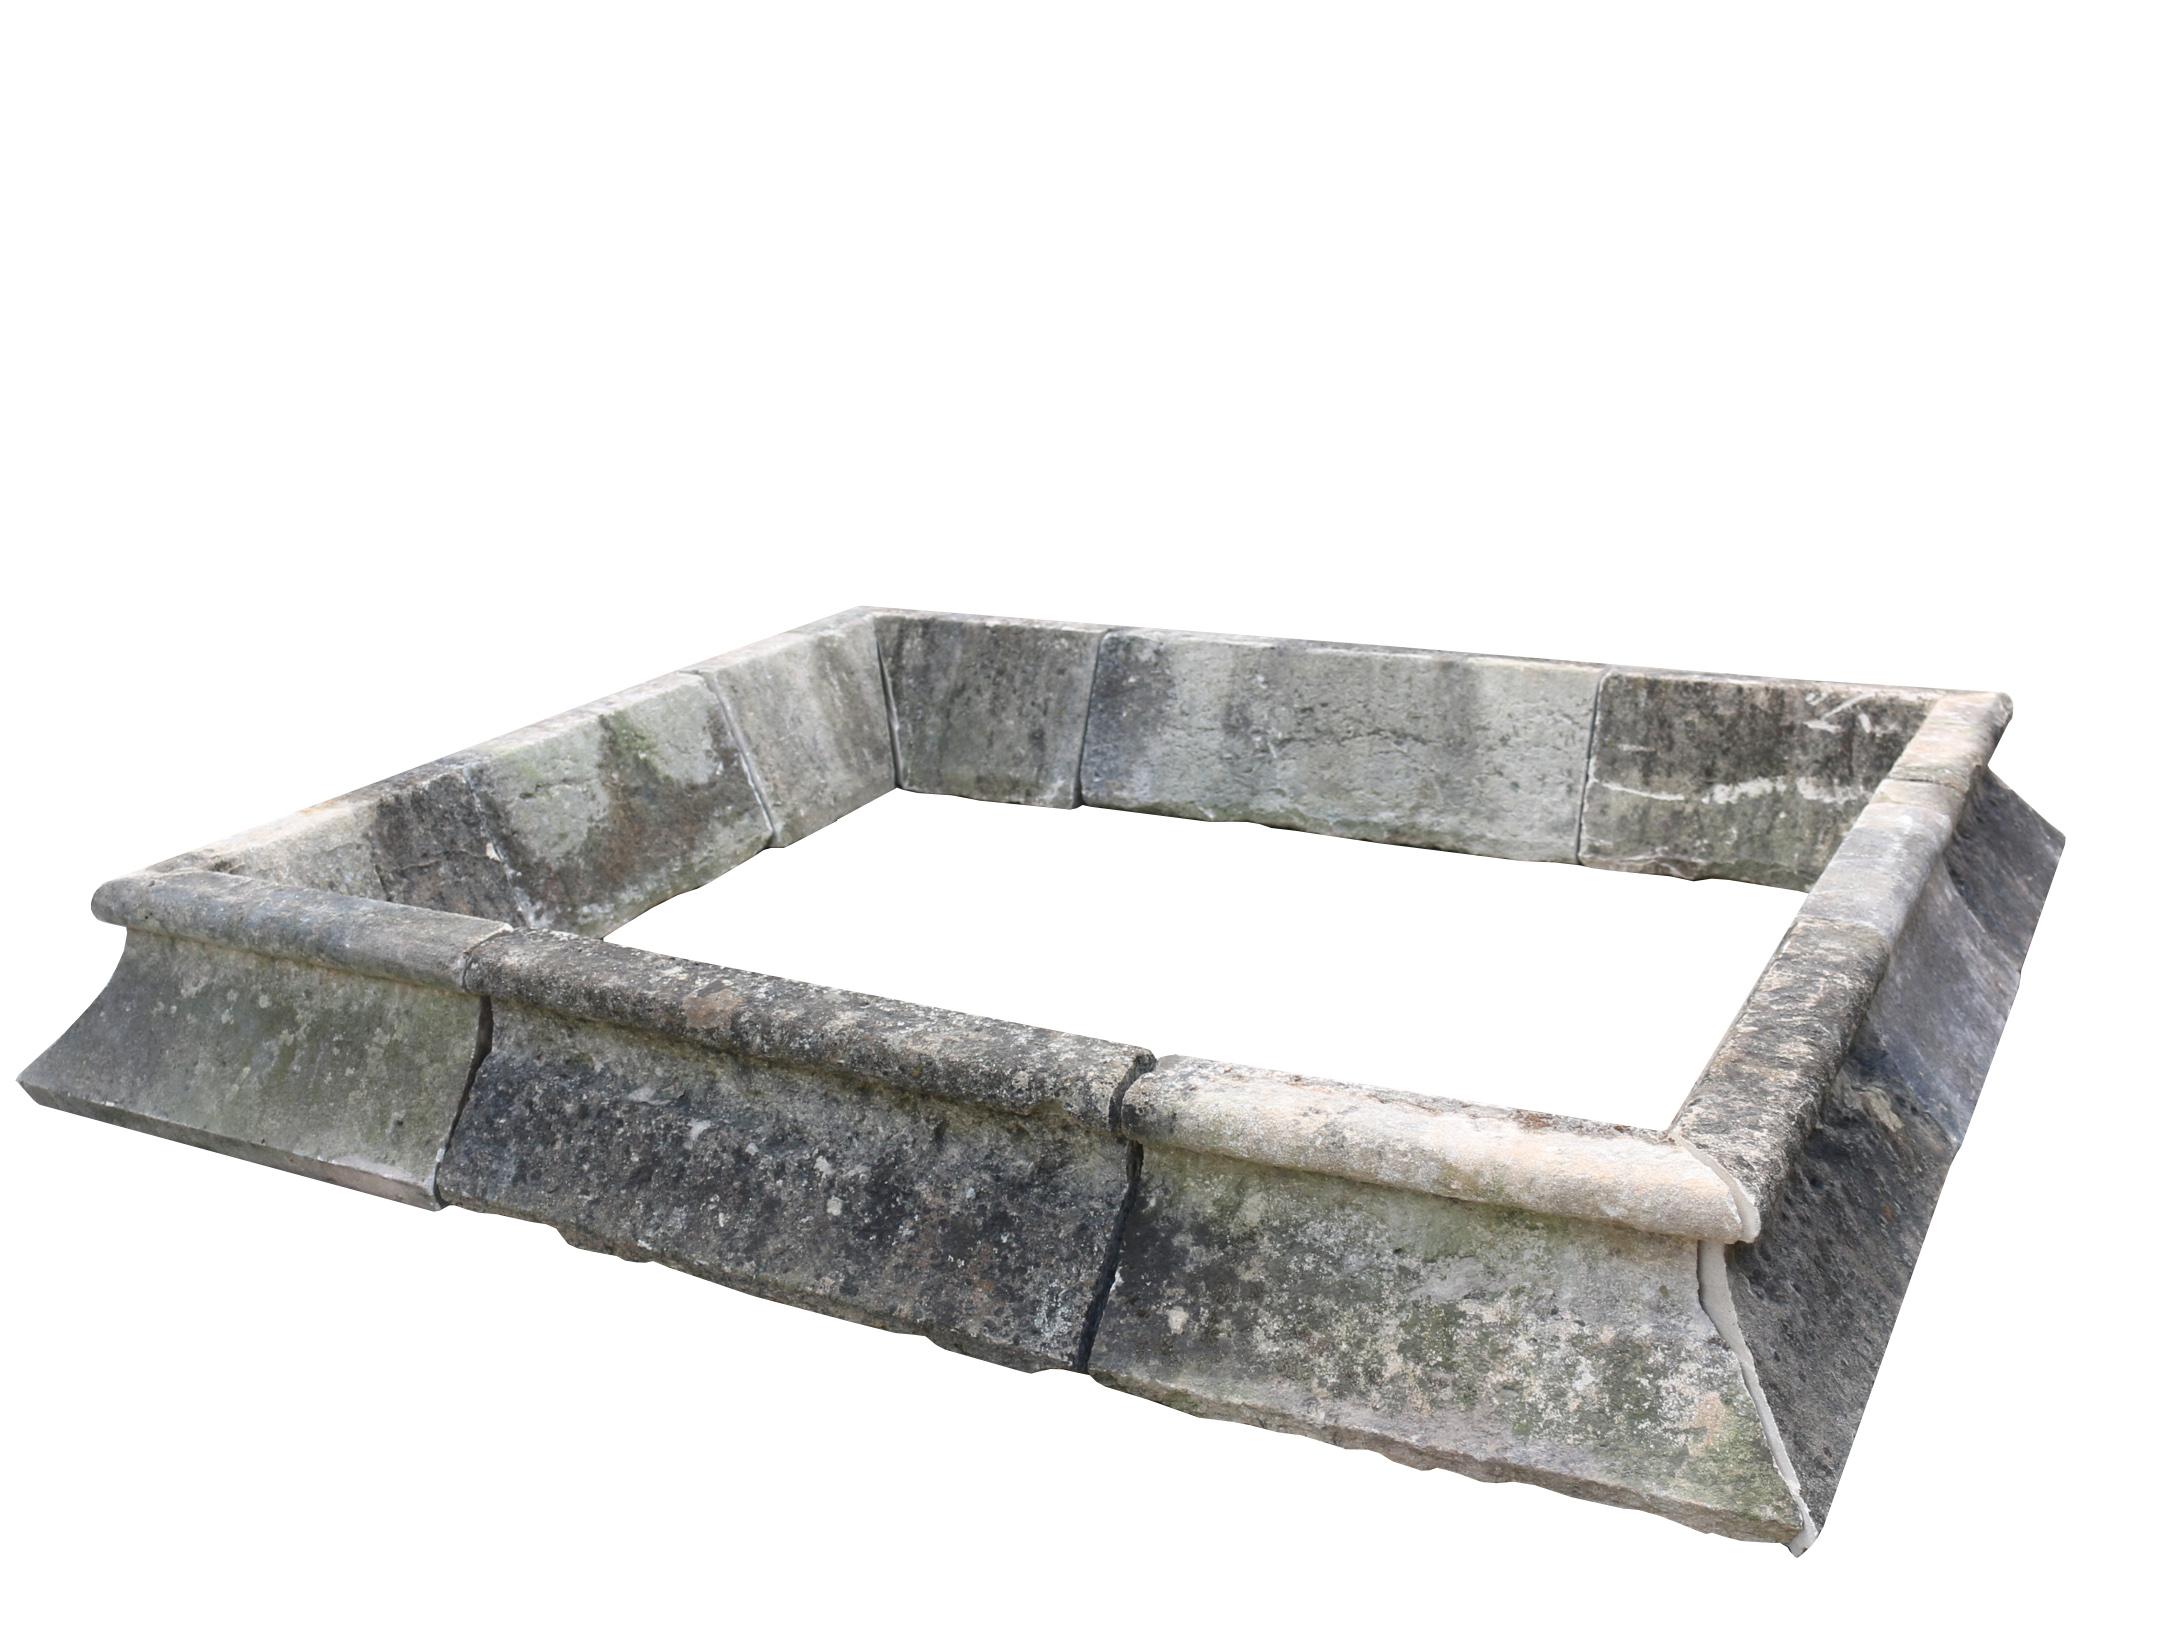 This pool /pond surround is well weathered with minor wear throughout.

External 229 cm x 101 cm
Internal 140 cm x 166 cm
Profile 30 cm x 30 cm
Weight 920 kg.